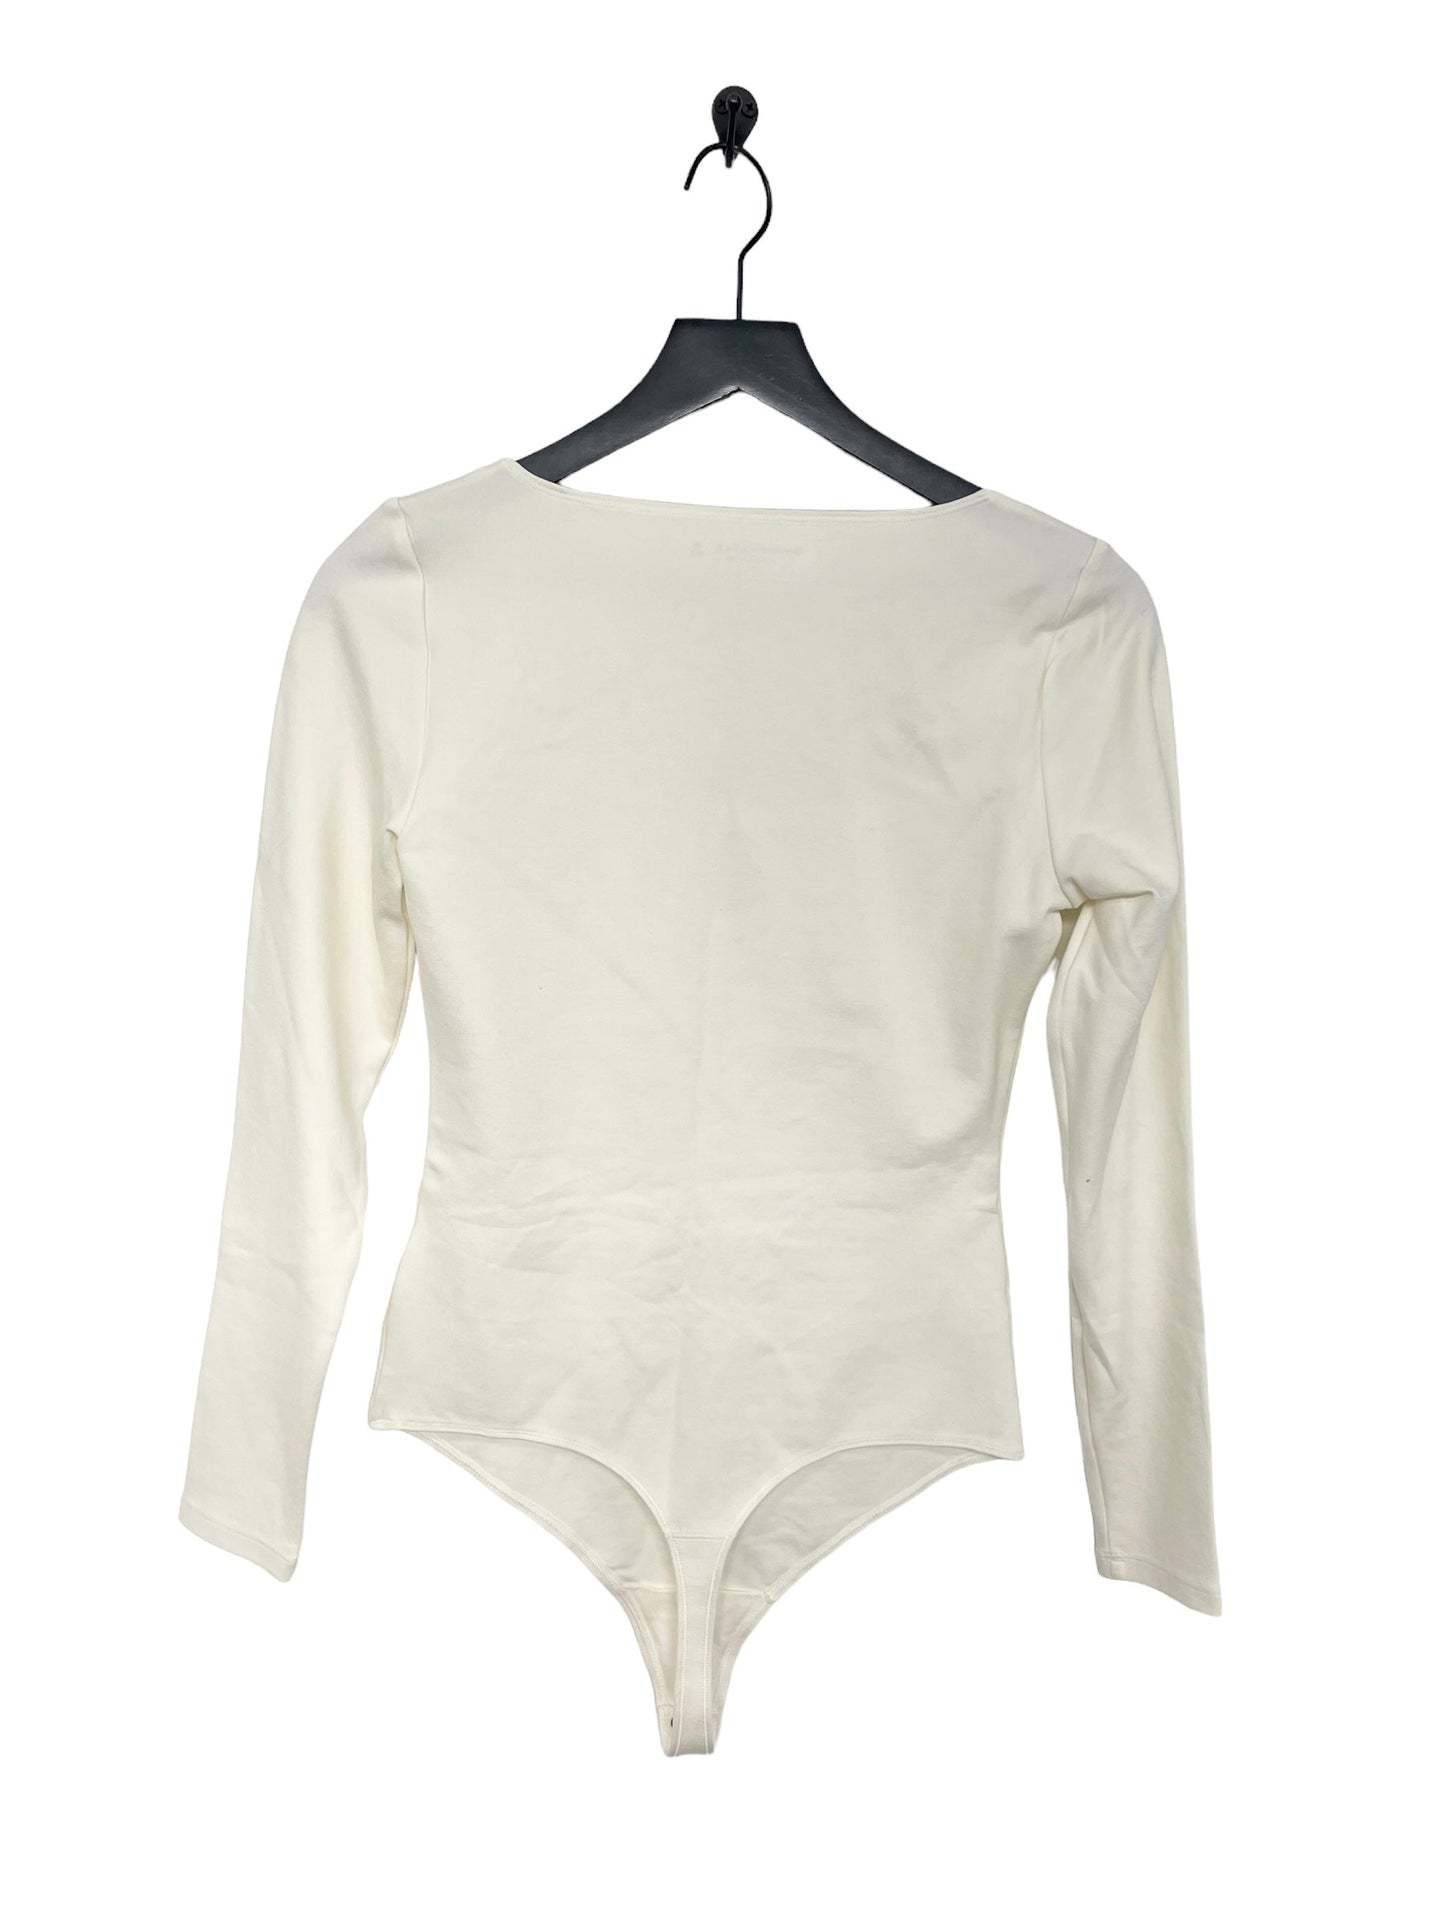 White Bodysuit Abercrombie And Fitch, Size M